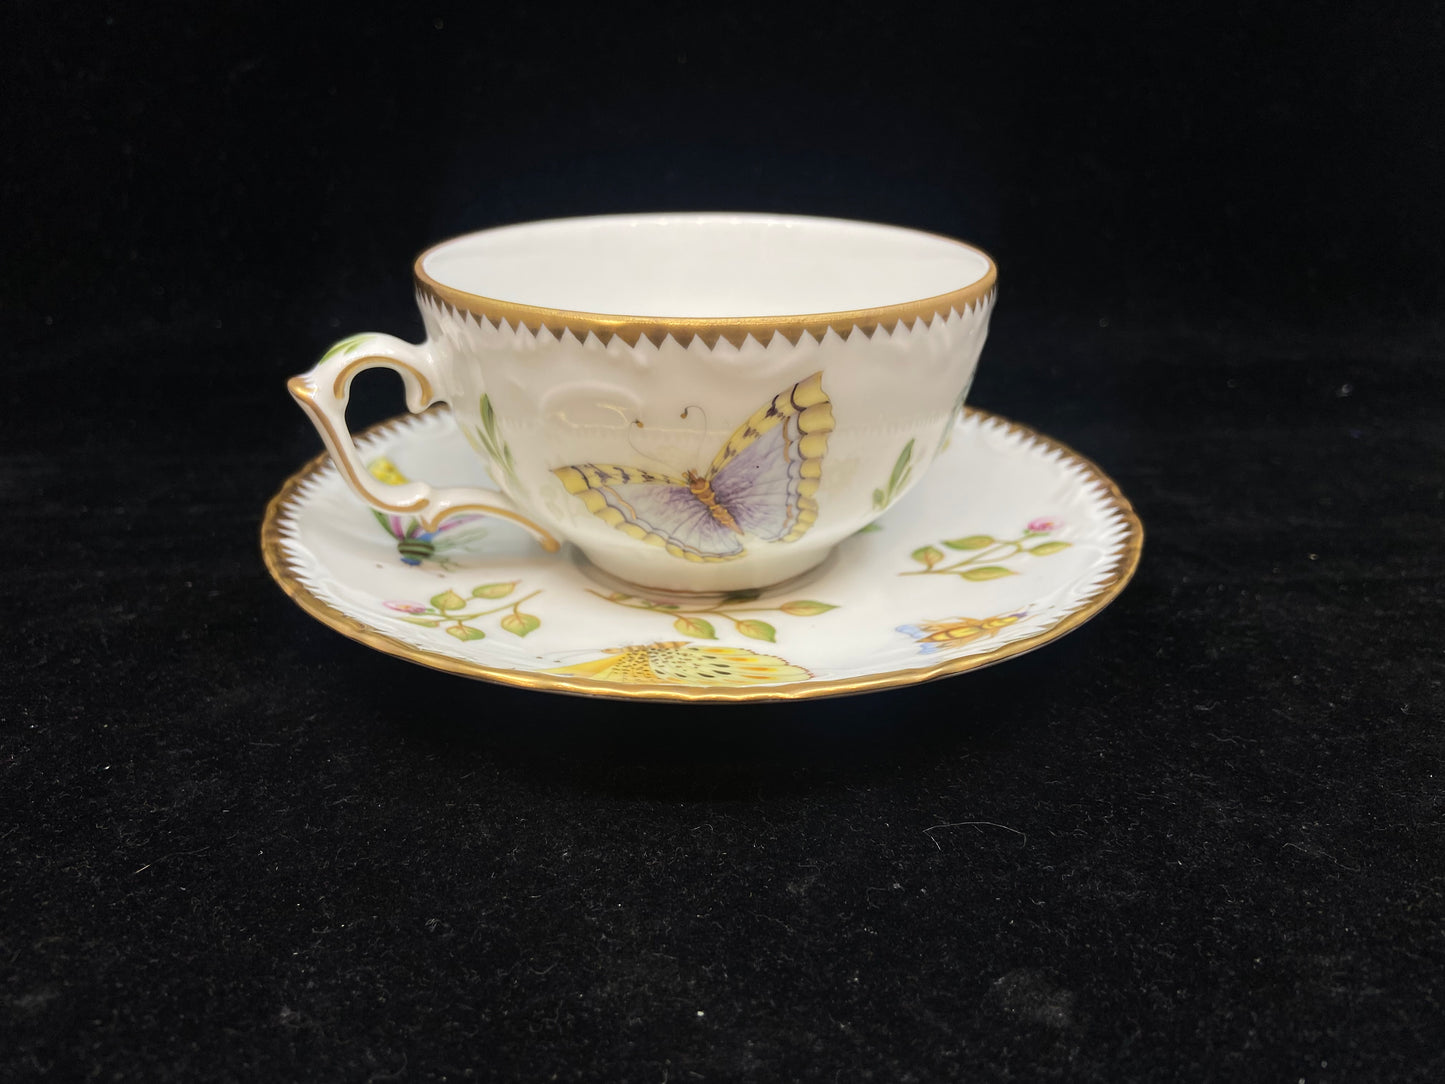 Anna Weatherly Cup and Saucer